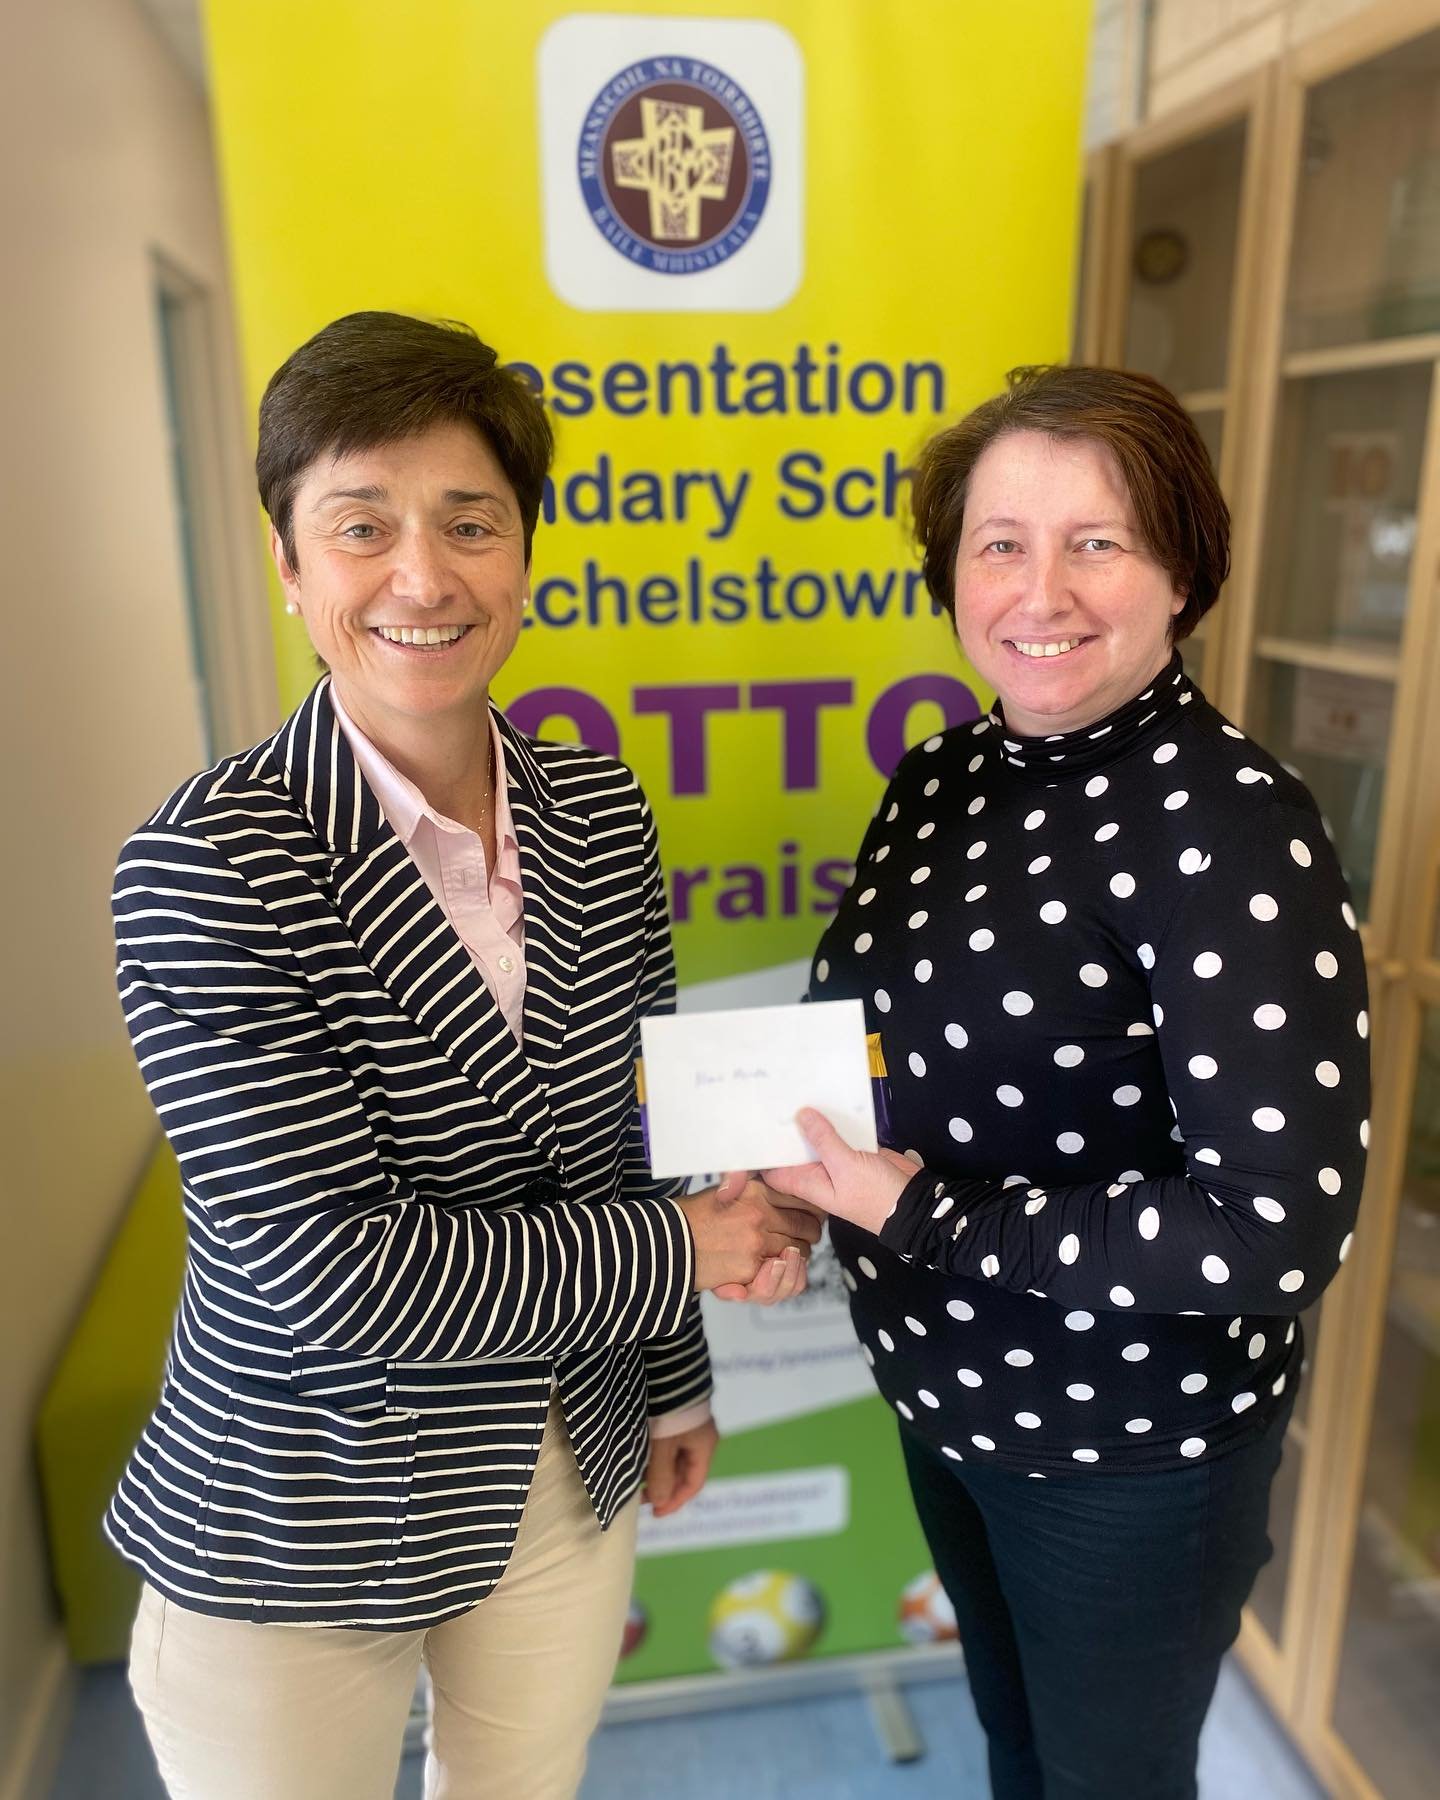 LOTTO WINNER Congratulations to the first ever winner of the school lotto, Marie Meade! Thank you to all the parents and wider community for supporting our fundraising effort for a new Astro turf pitch. Next draw takes place this Thursday.. are you i